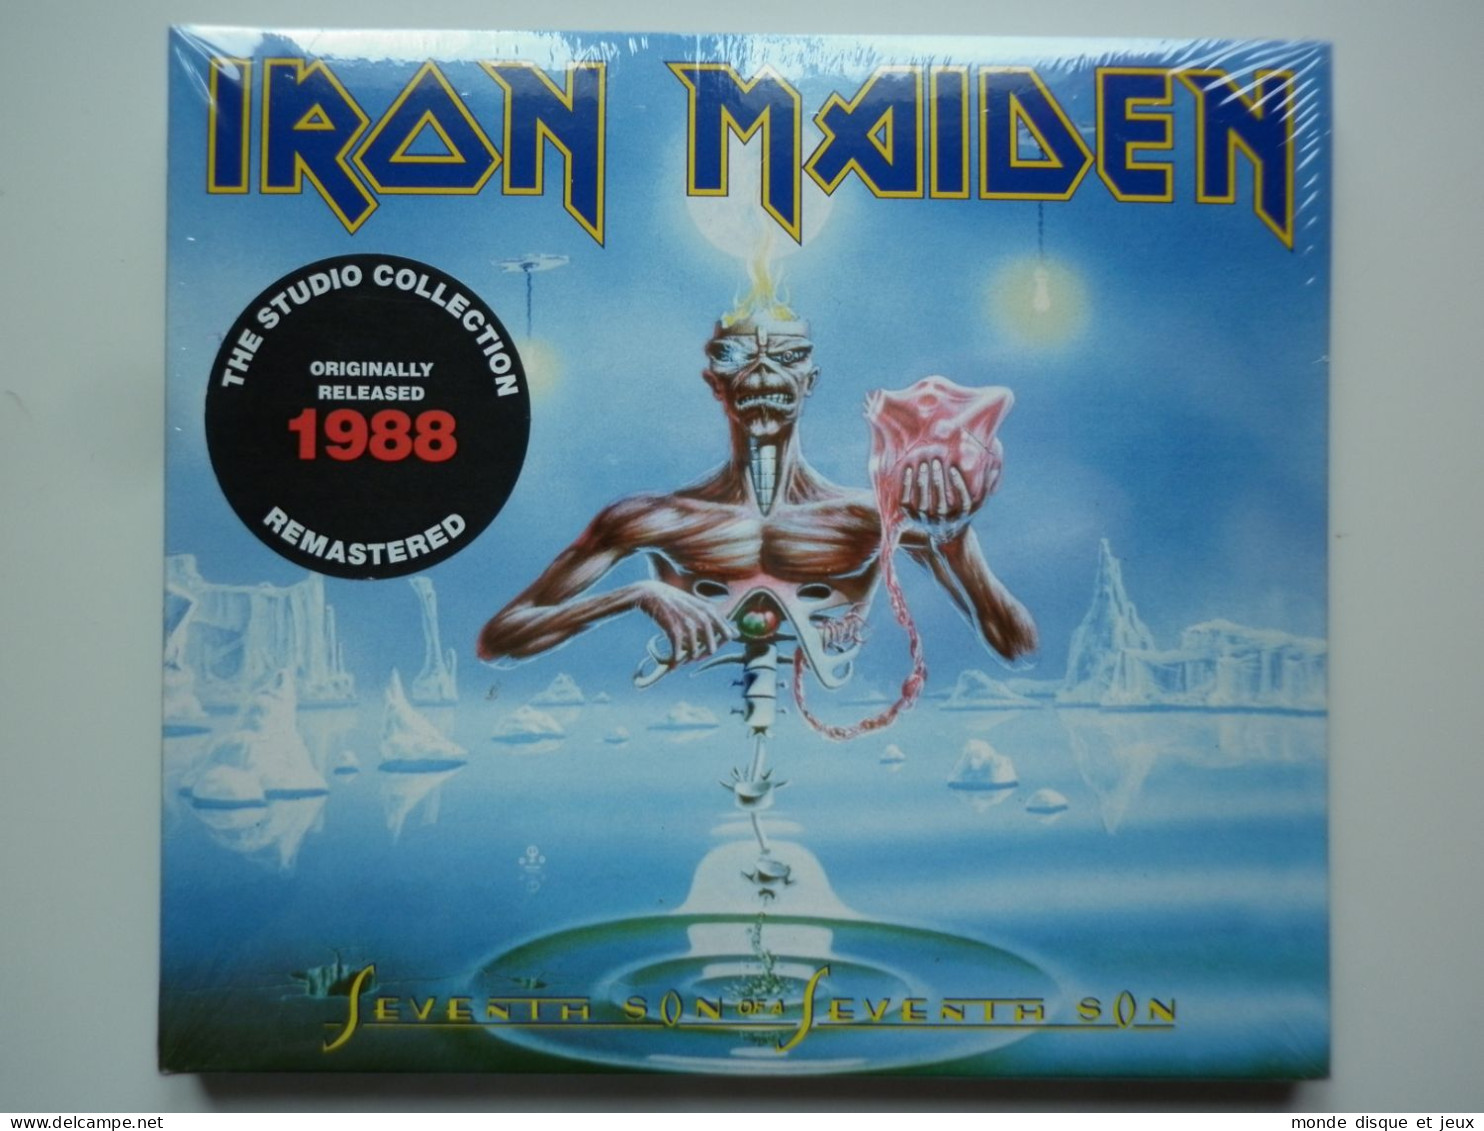 Iron Maiden Cd Album Digipack Seventh Son Of A Seventh Son - Other - French Music